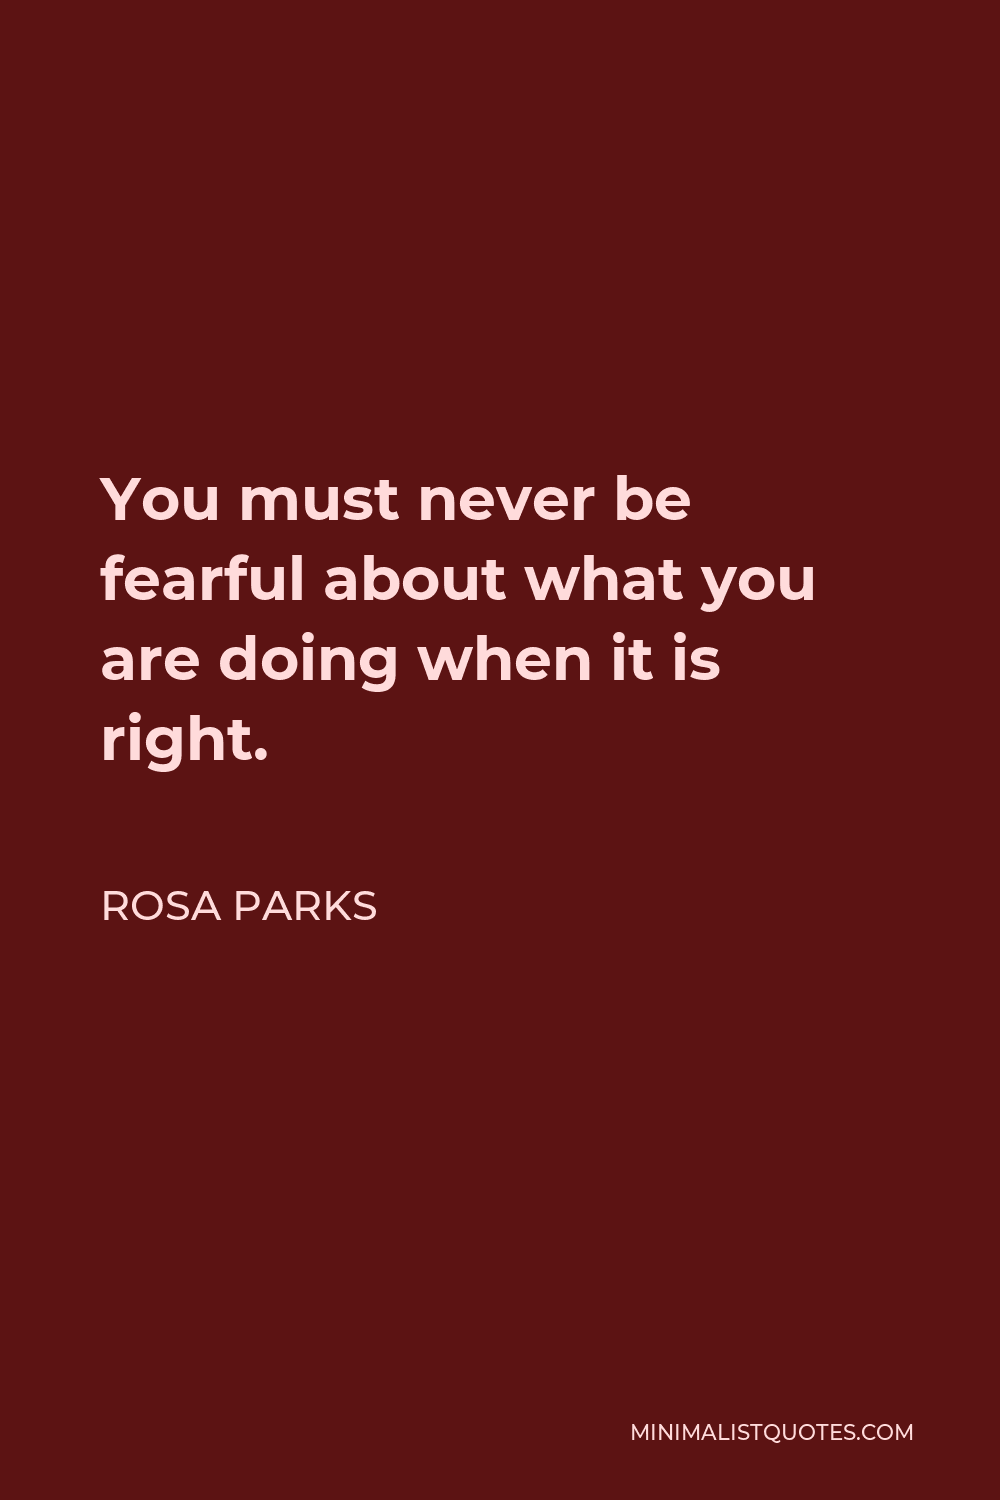 Rosa Parks Quote - You must never be fearful about what you are doing when it is right.